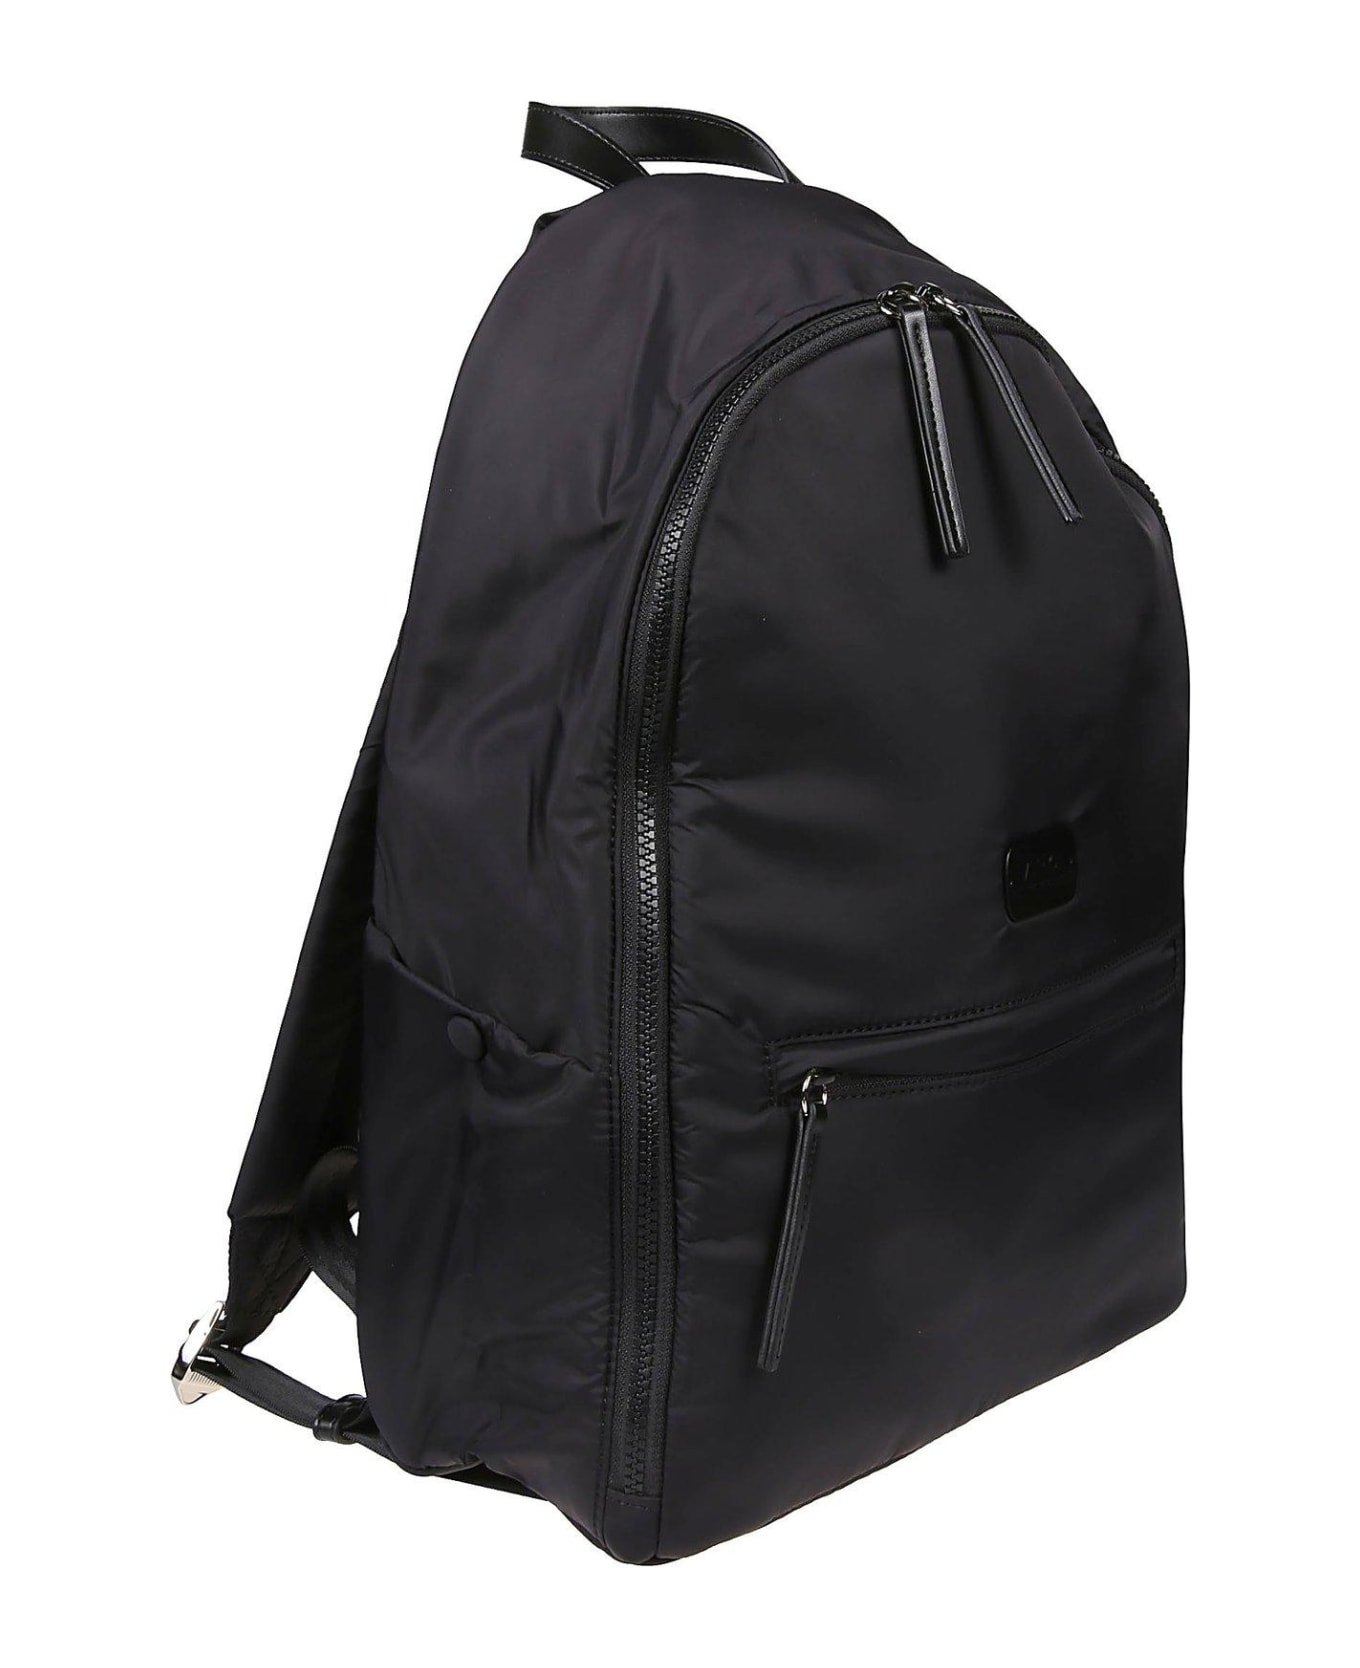 A.P.C. Logo Patch Zip-up Backpack - Lzz Noir バックパック